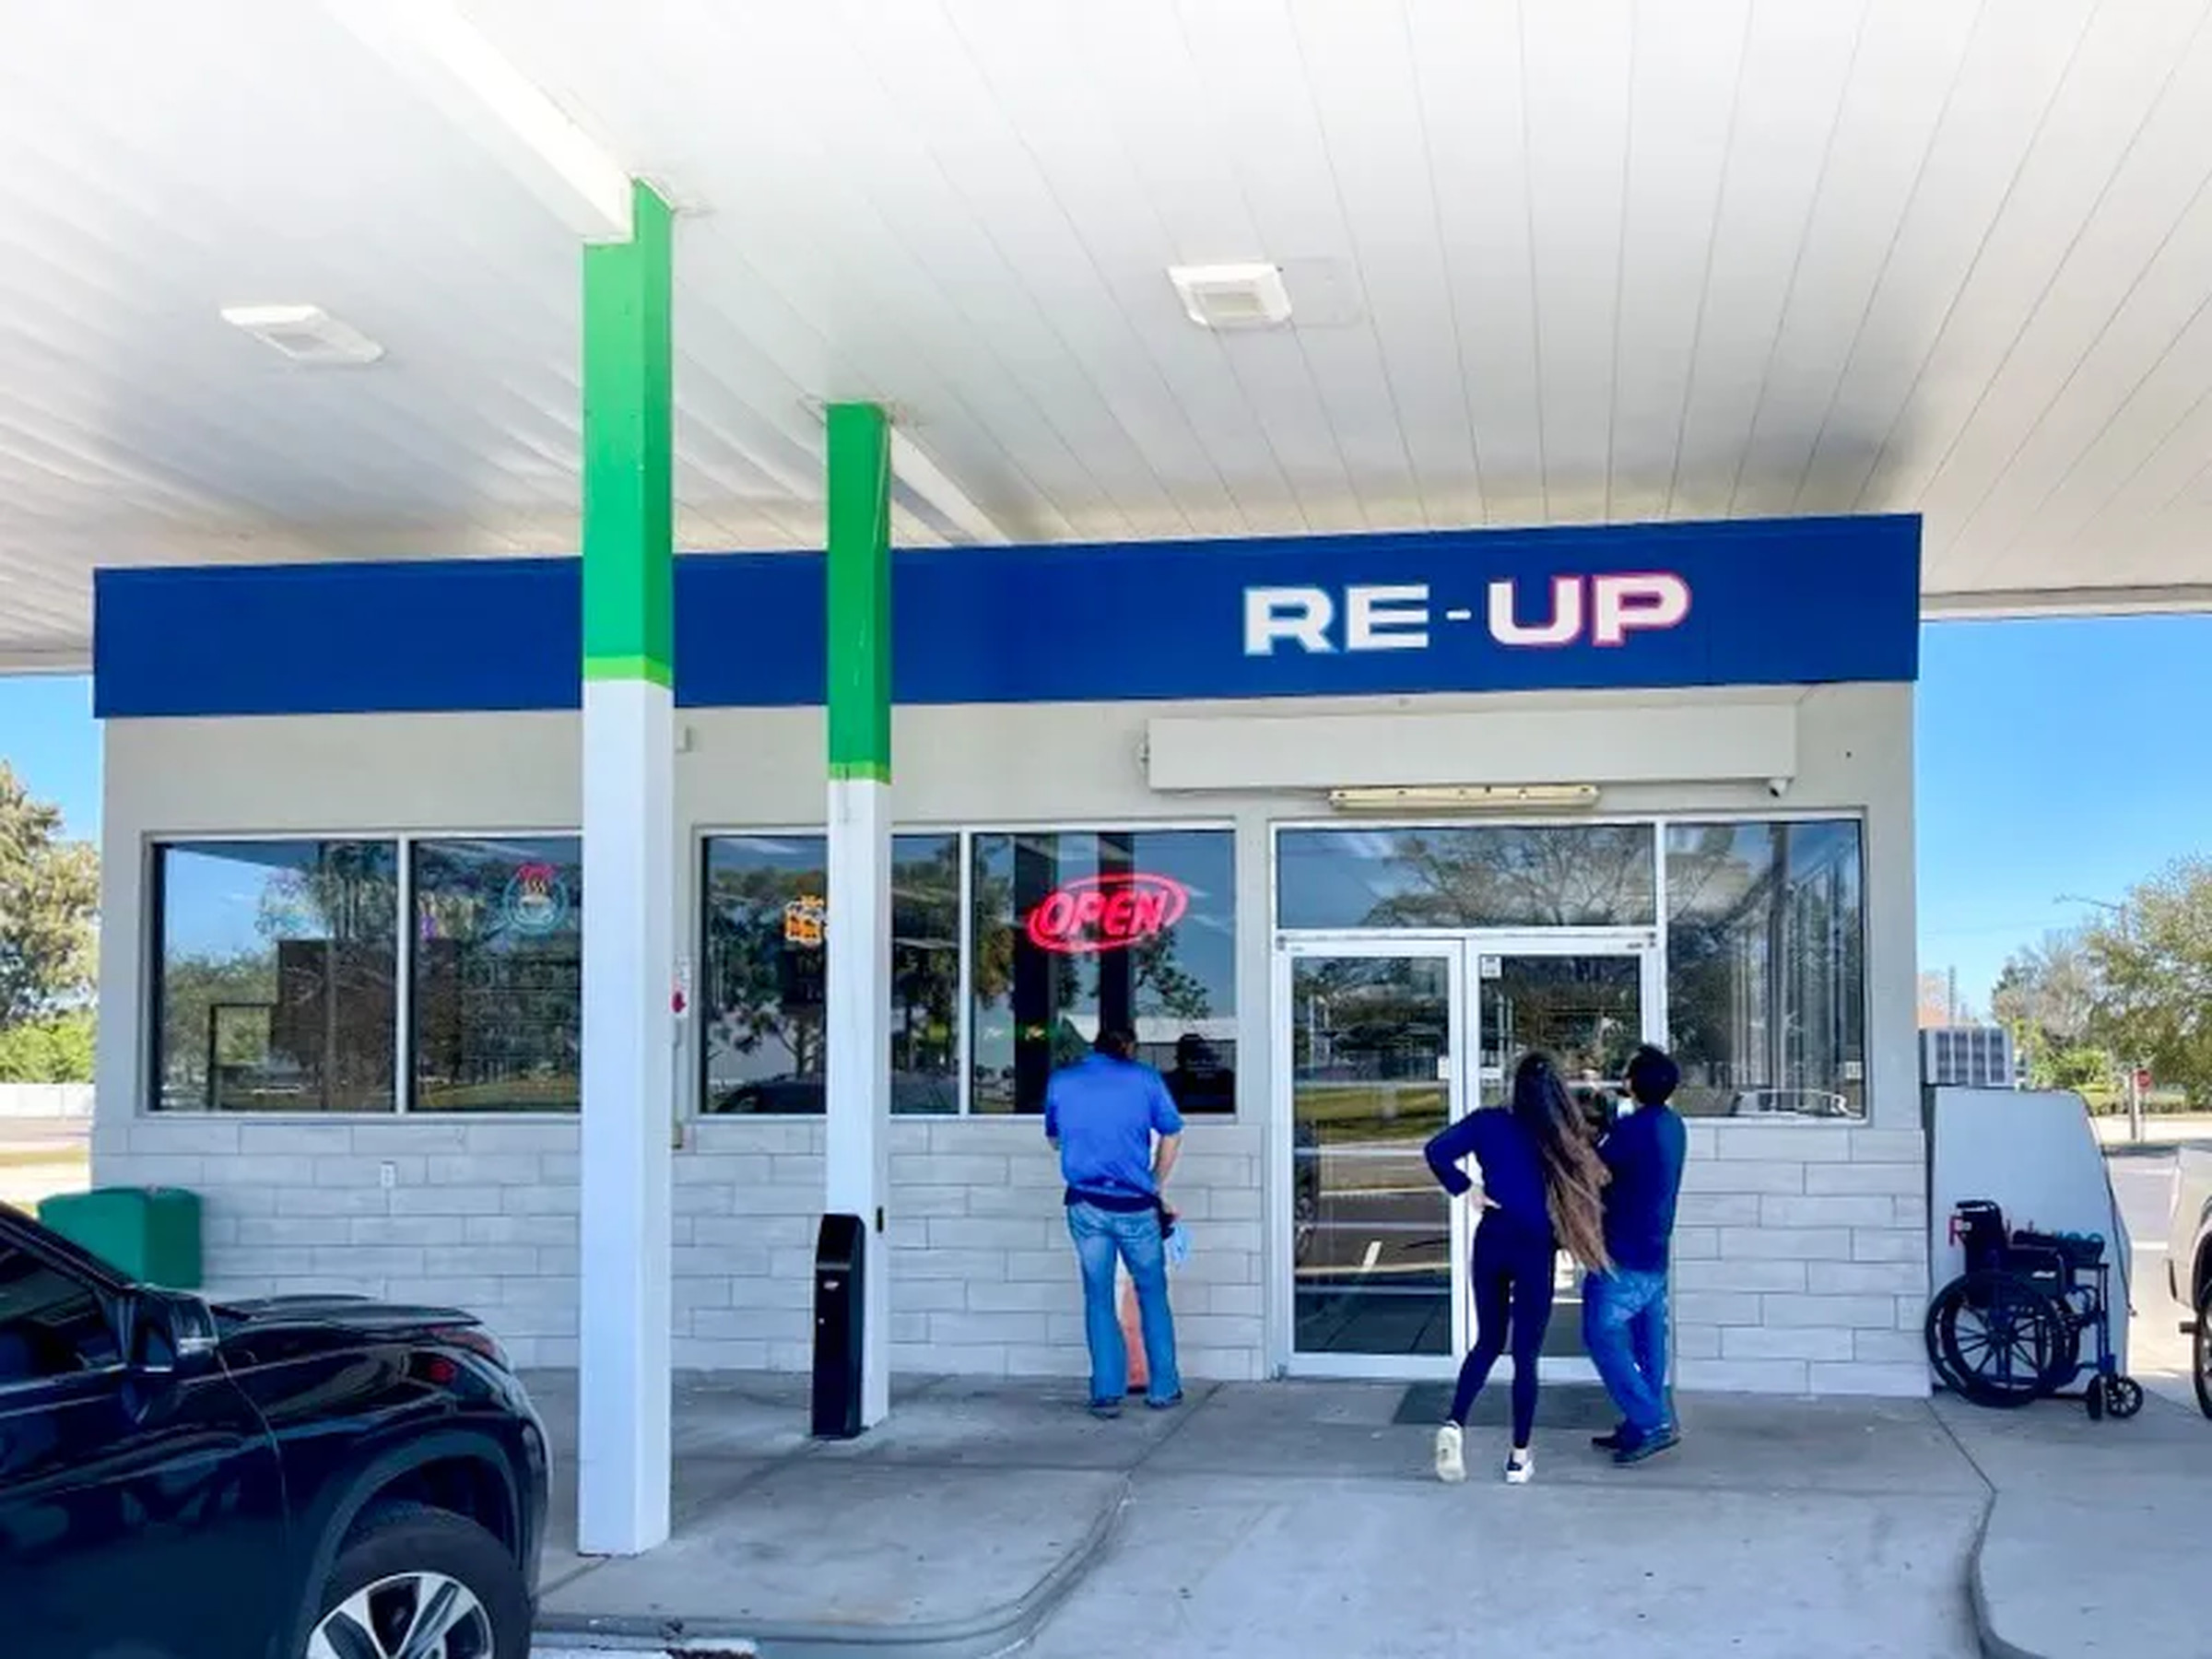 A dispute of one of Re-Up’s locations.